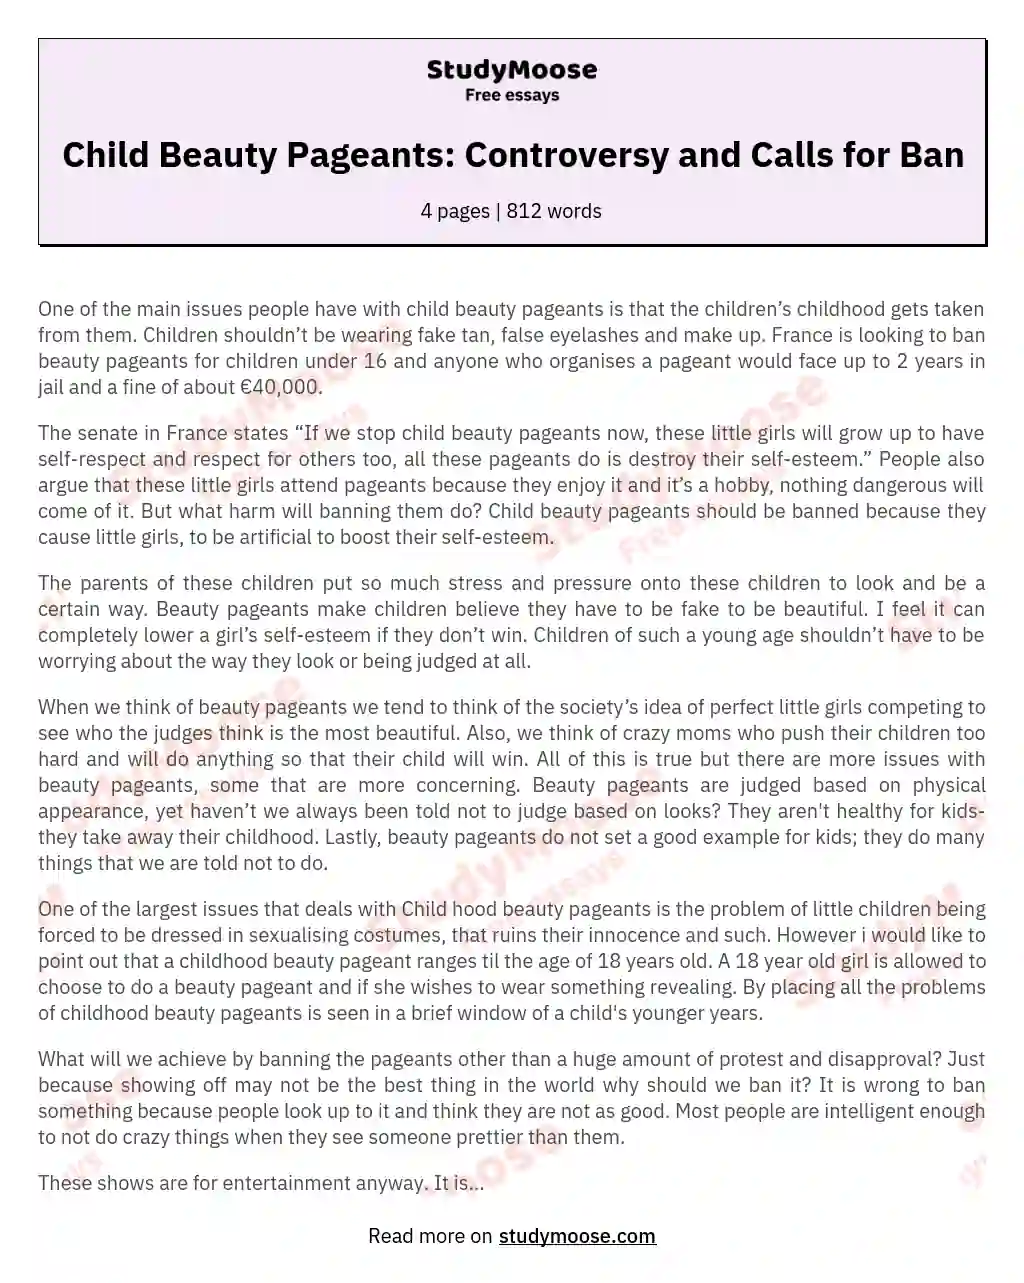 should beauty pageants be banned essay